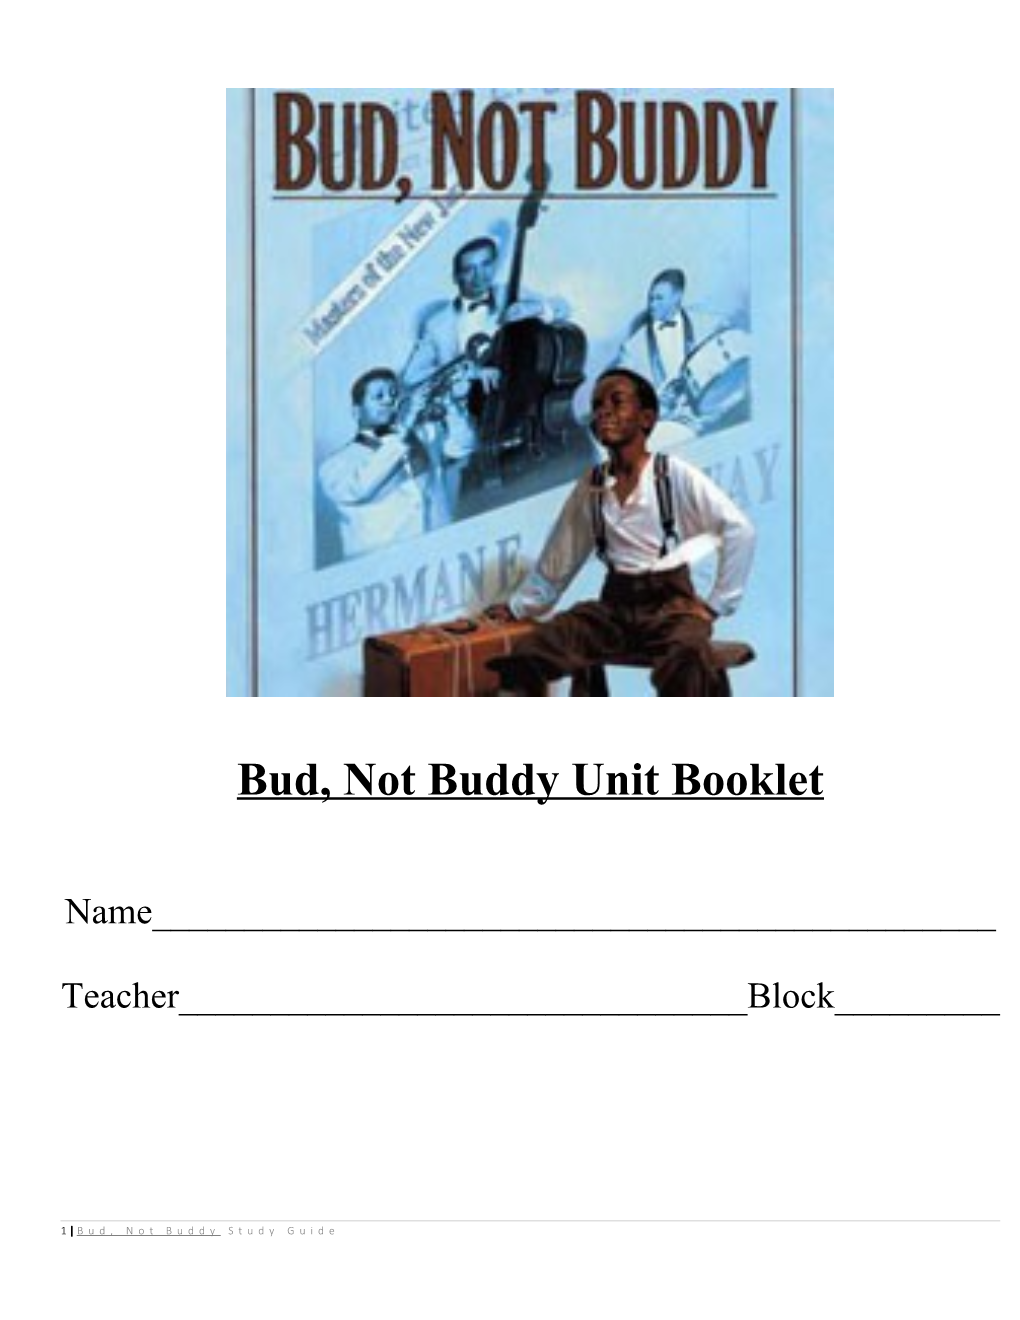 Bud, Not Buddy Unit Booklet